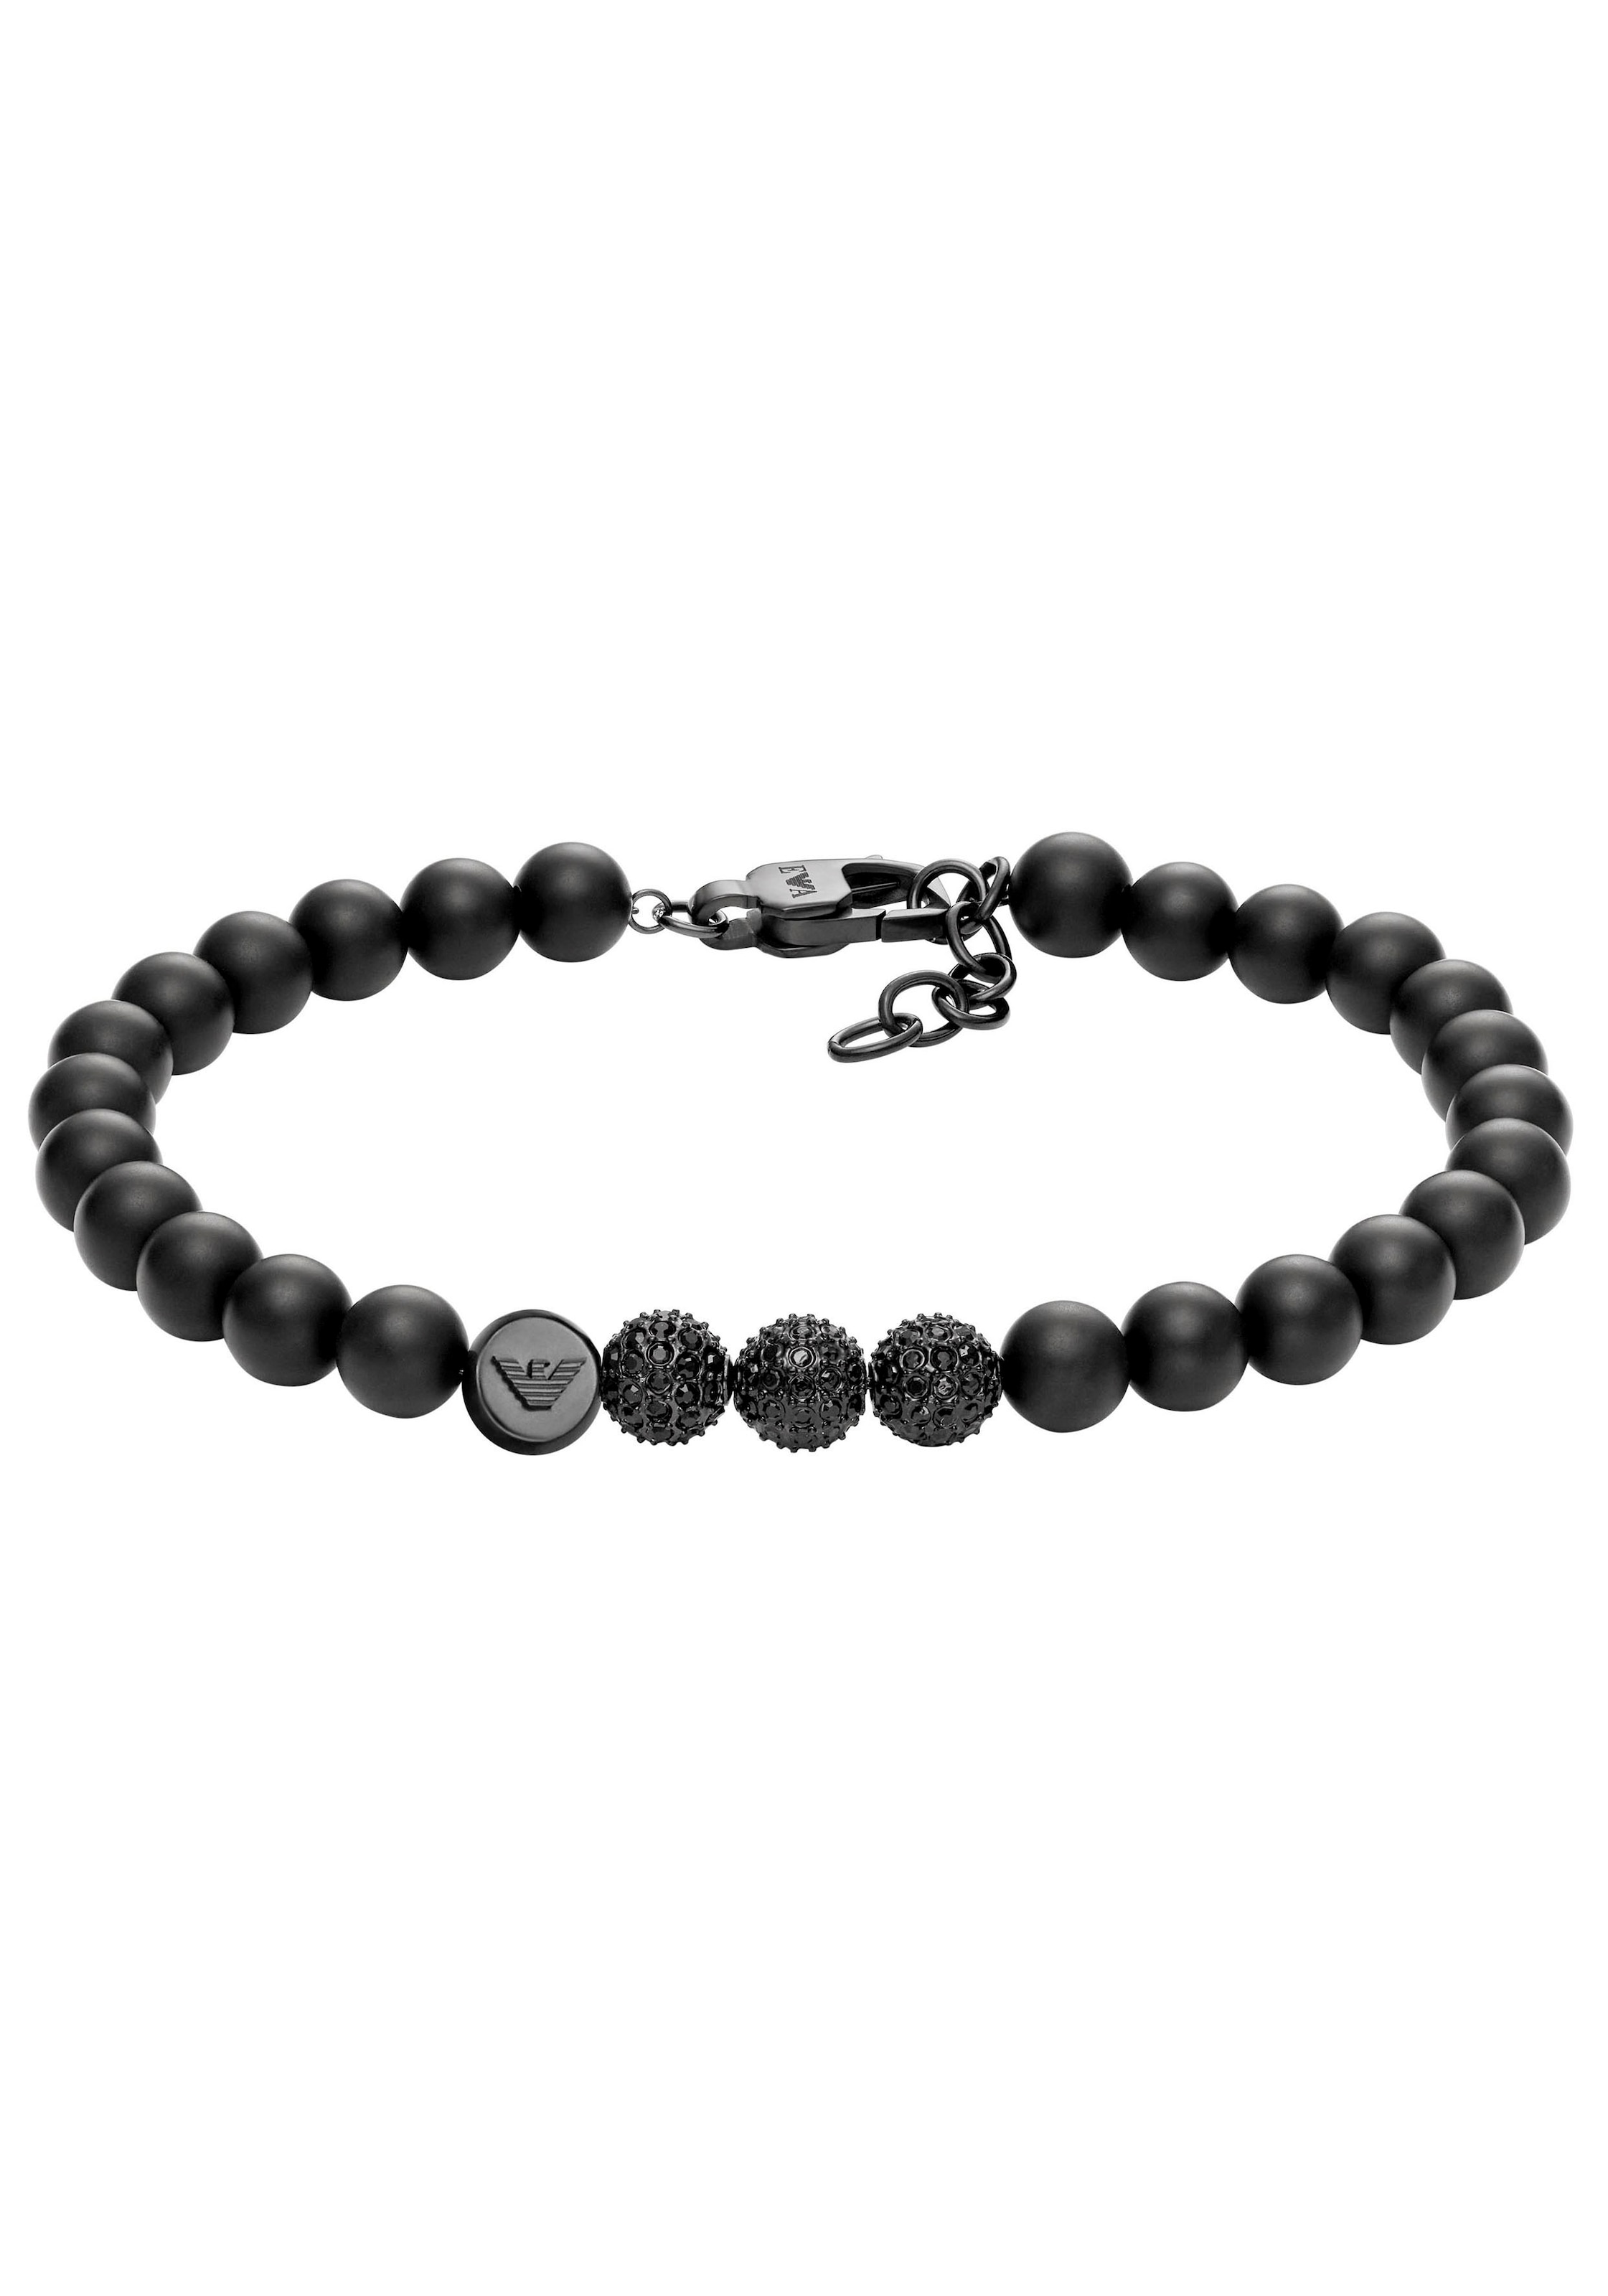 Gagat EGS3030001«, und BEADS TREND, »ICONIC Armani mit Armband Onyx AND PAVE, Emporio BAUR |